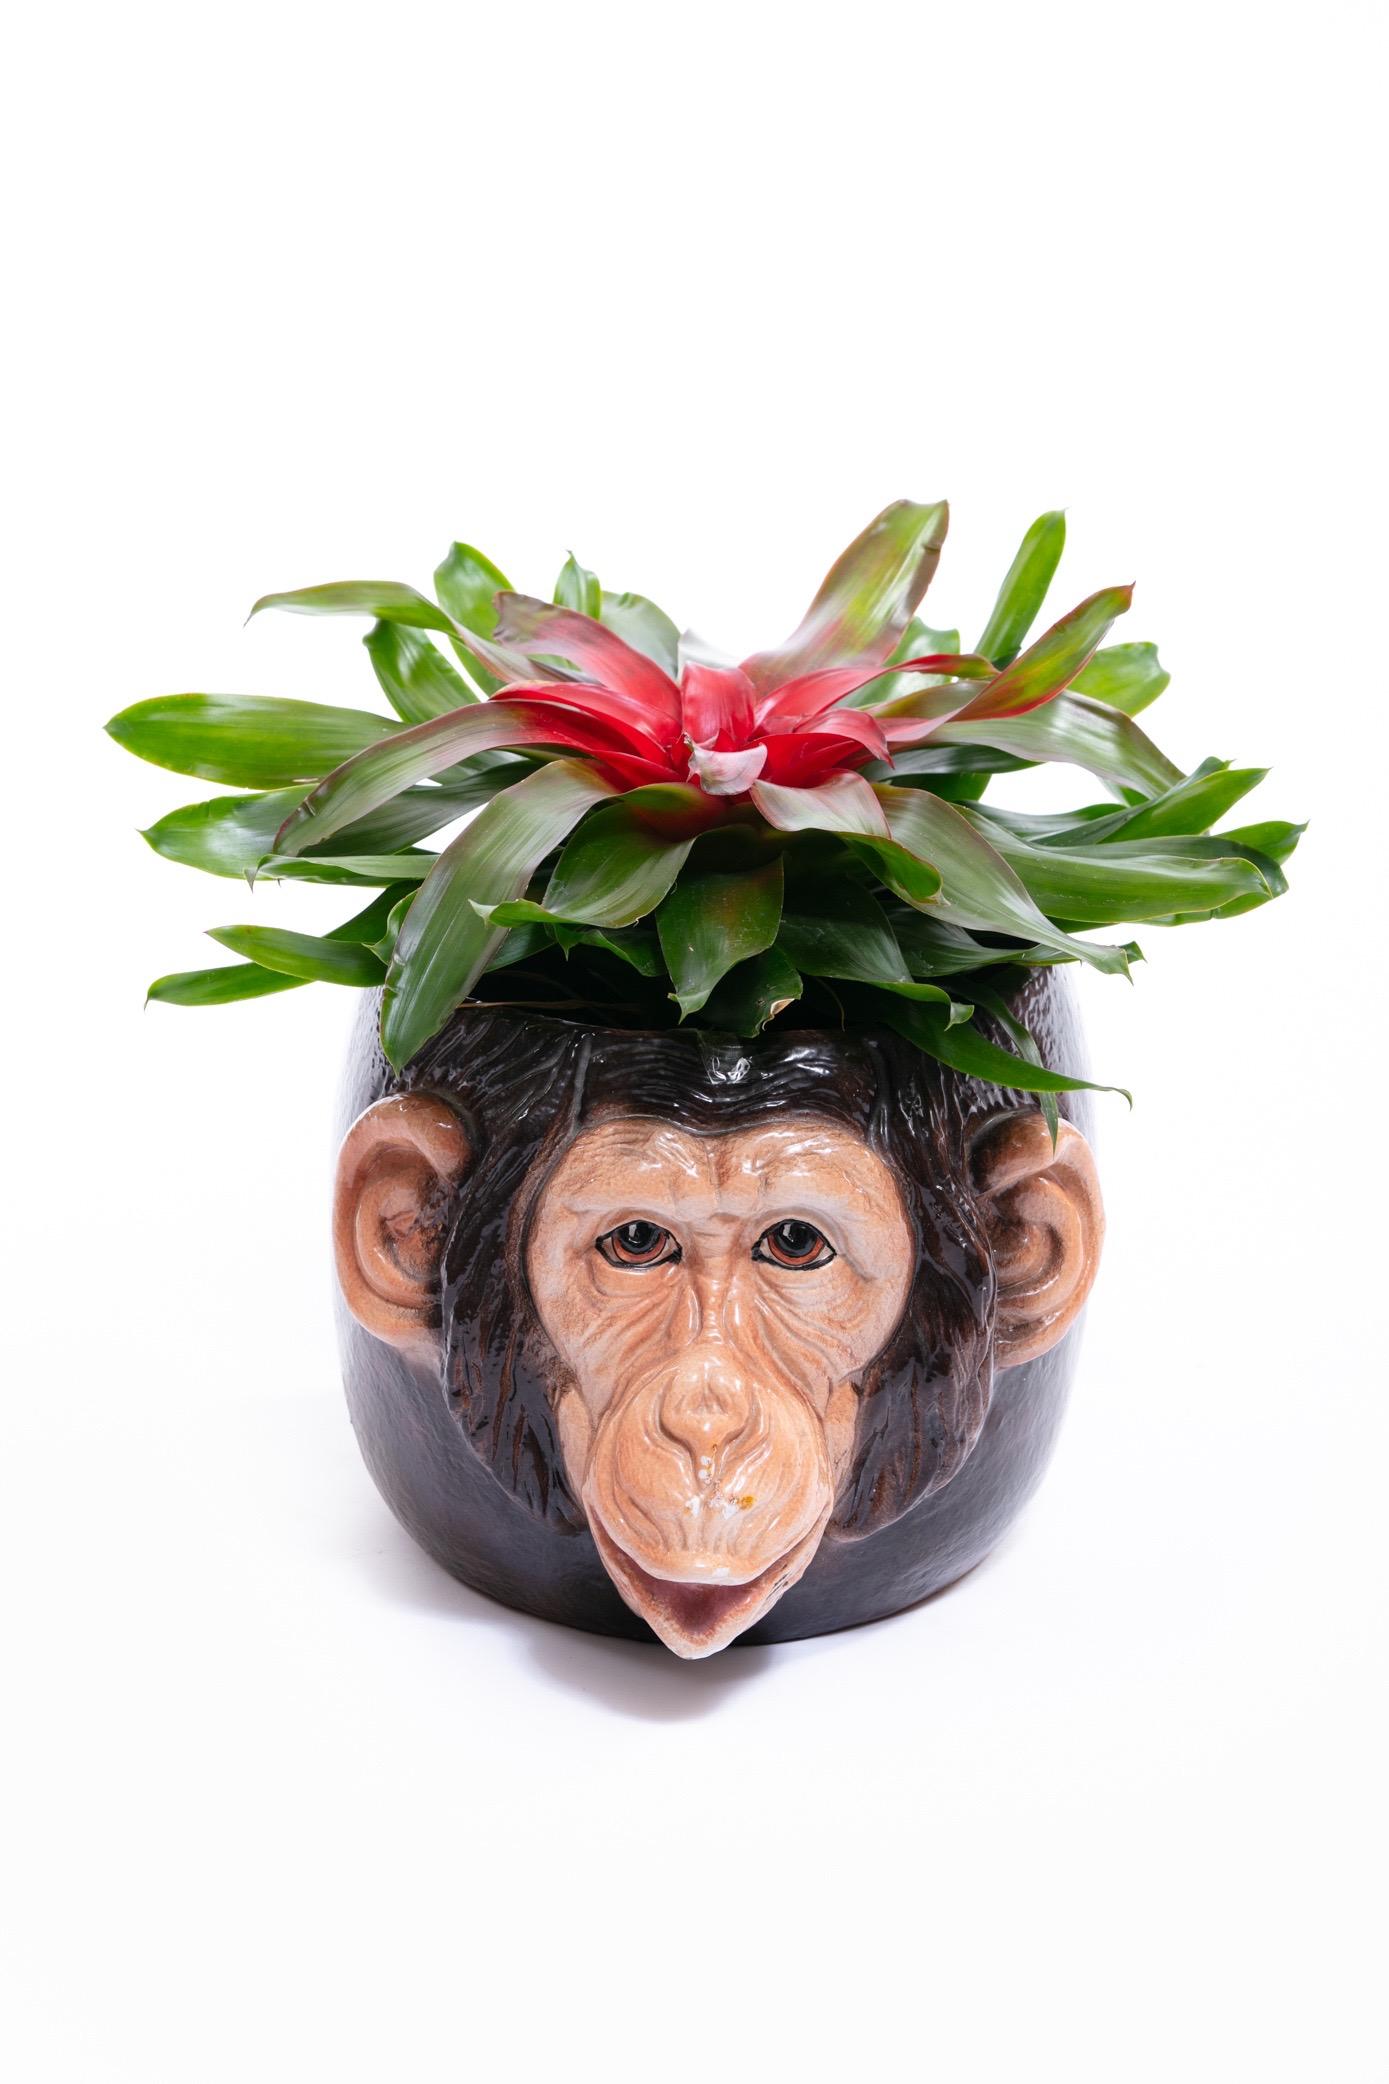 Who doesn't love a chimpanzee? Hand painted Italian Mid Century ceramic planter. Festive. Fun. Lots of hand painted detail - a work of ceramic art. Perfect accessory for adding a fun pop or vibe. Want to see more beautiful things? Scroll down below